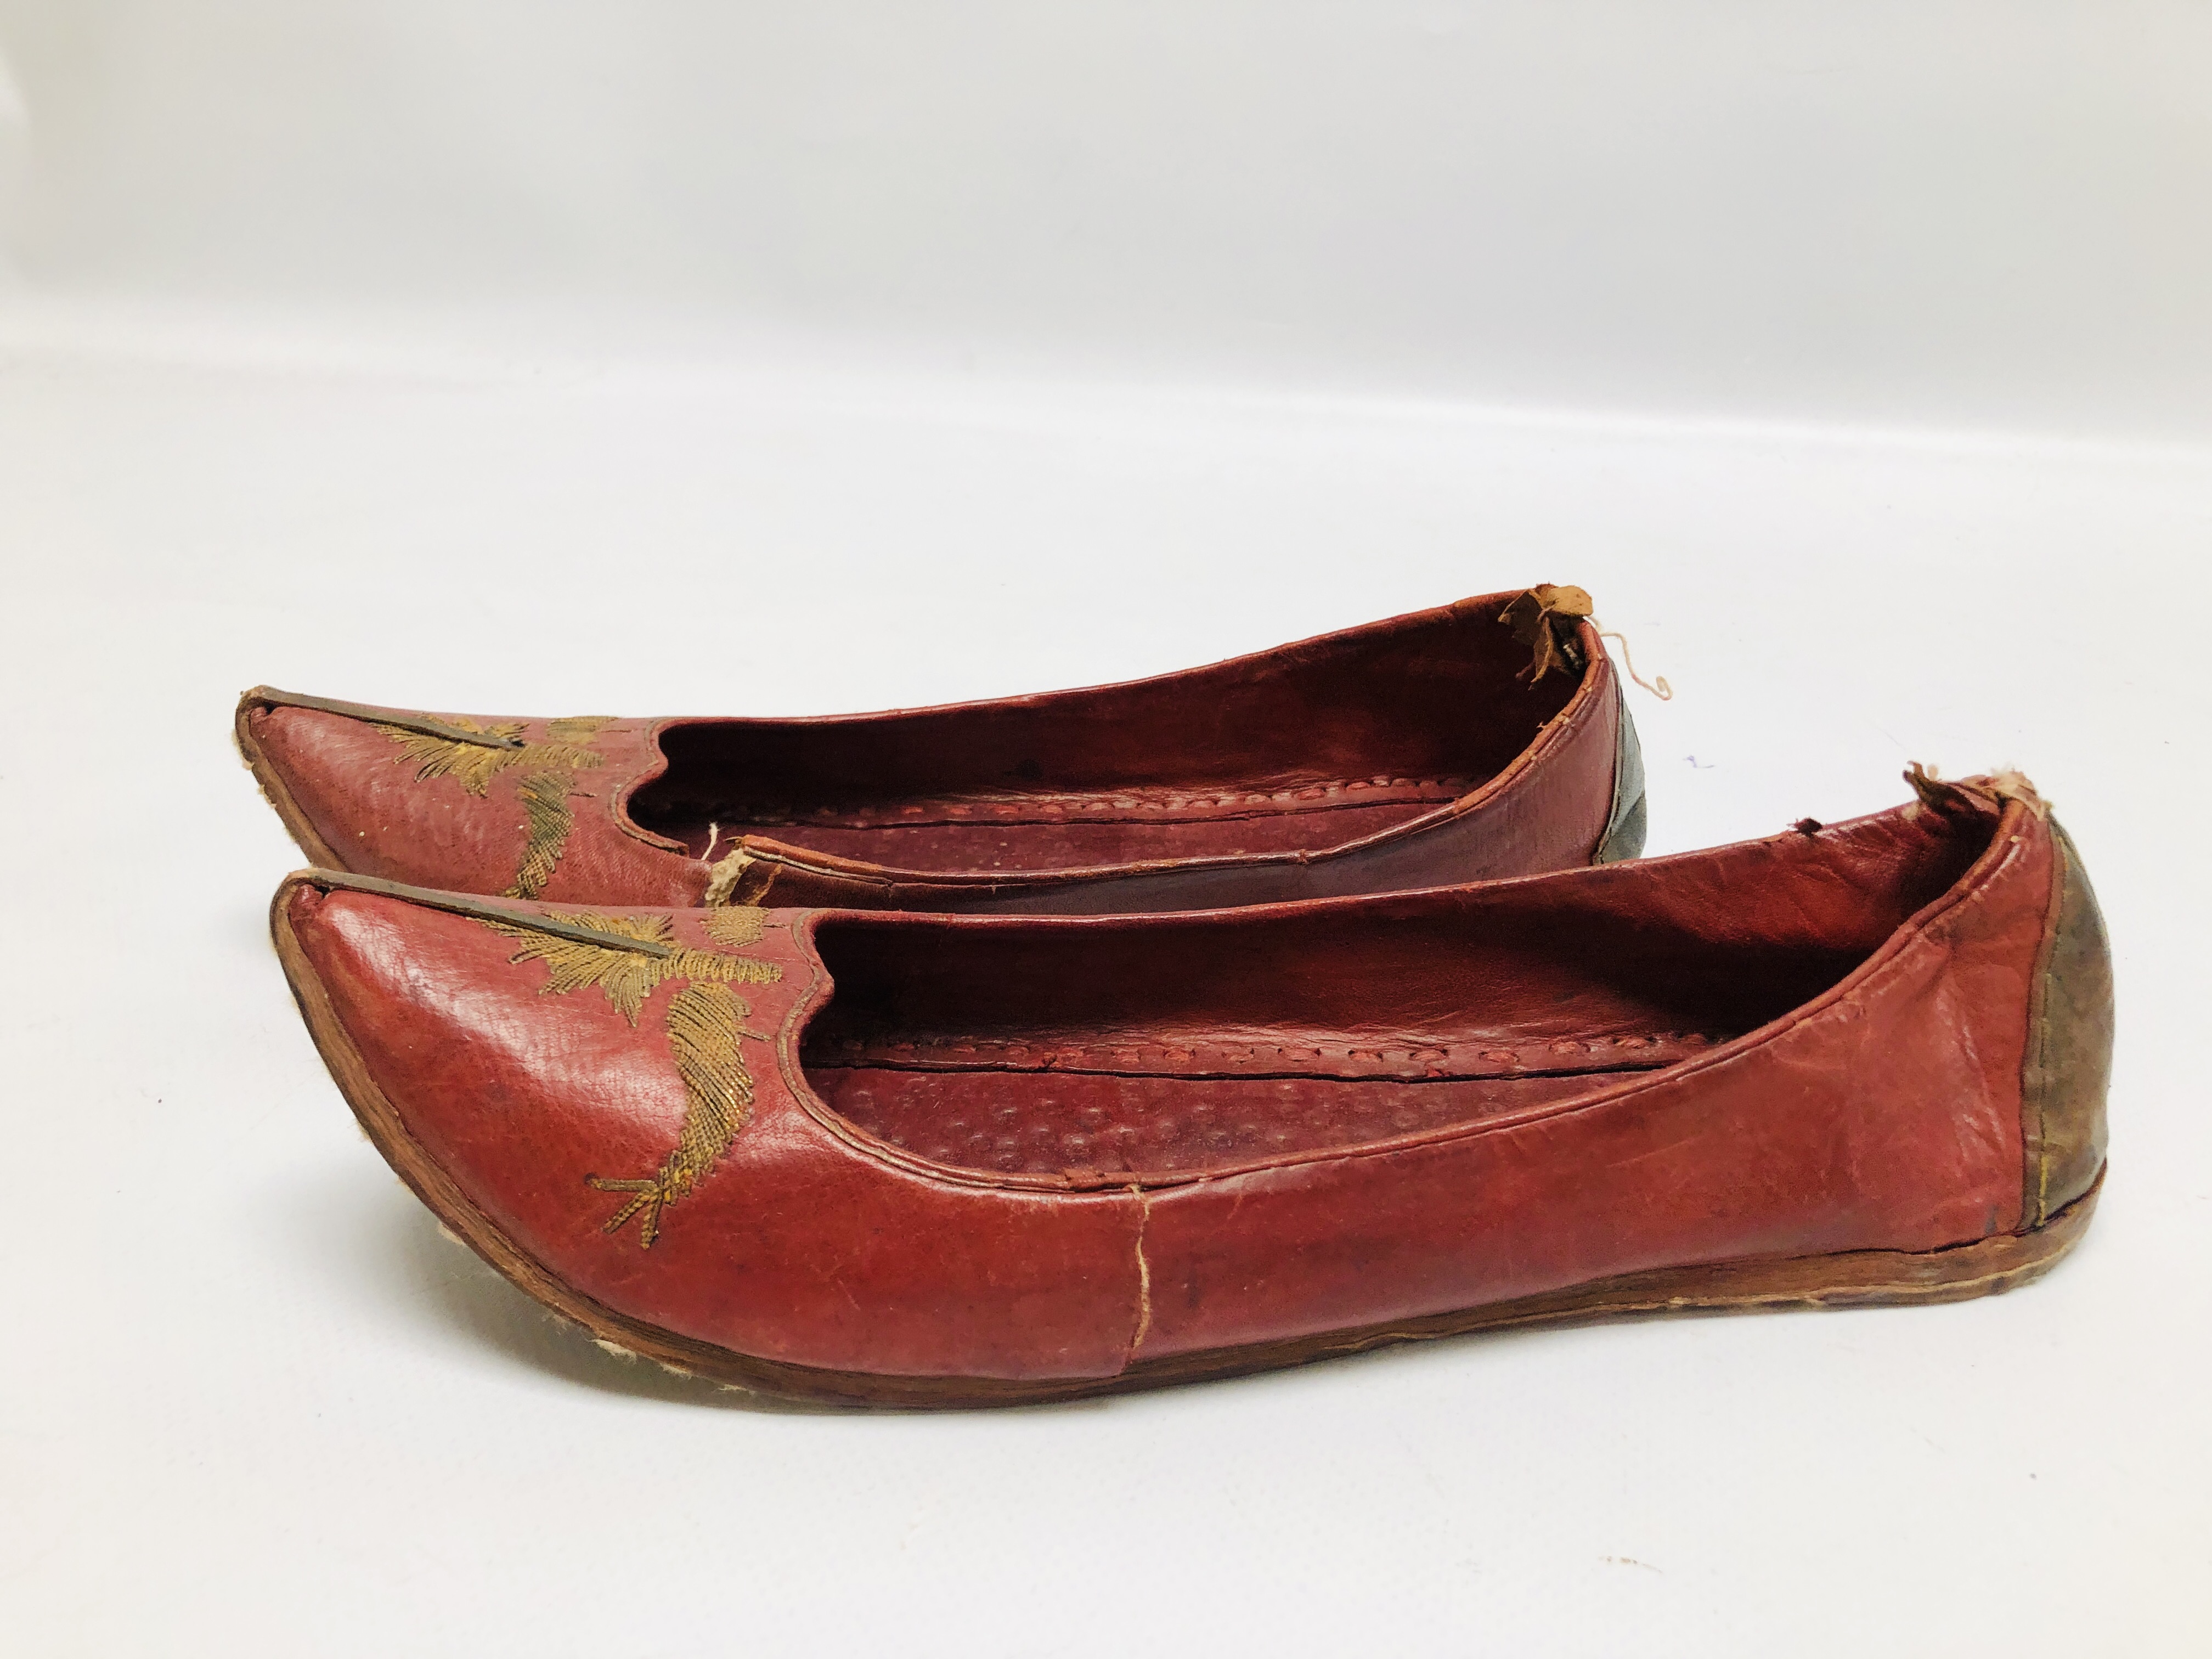 PAIR OF EARLY C20TH AFGHAN LEATHER SHOES WITH GOLD THREAD EMBROIDERY. - Image 2 of 10